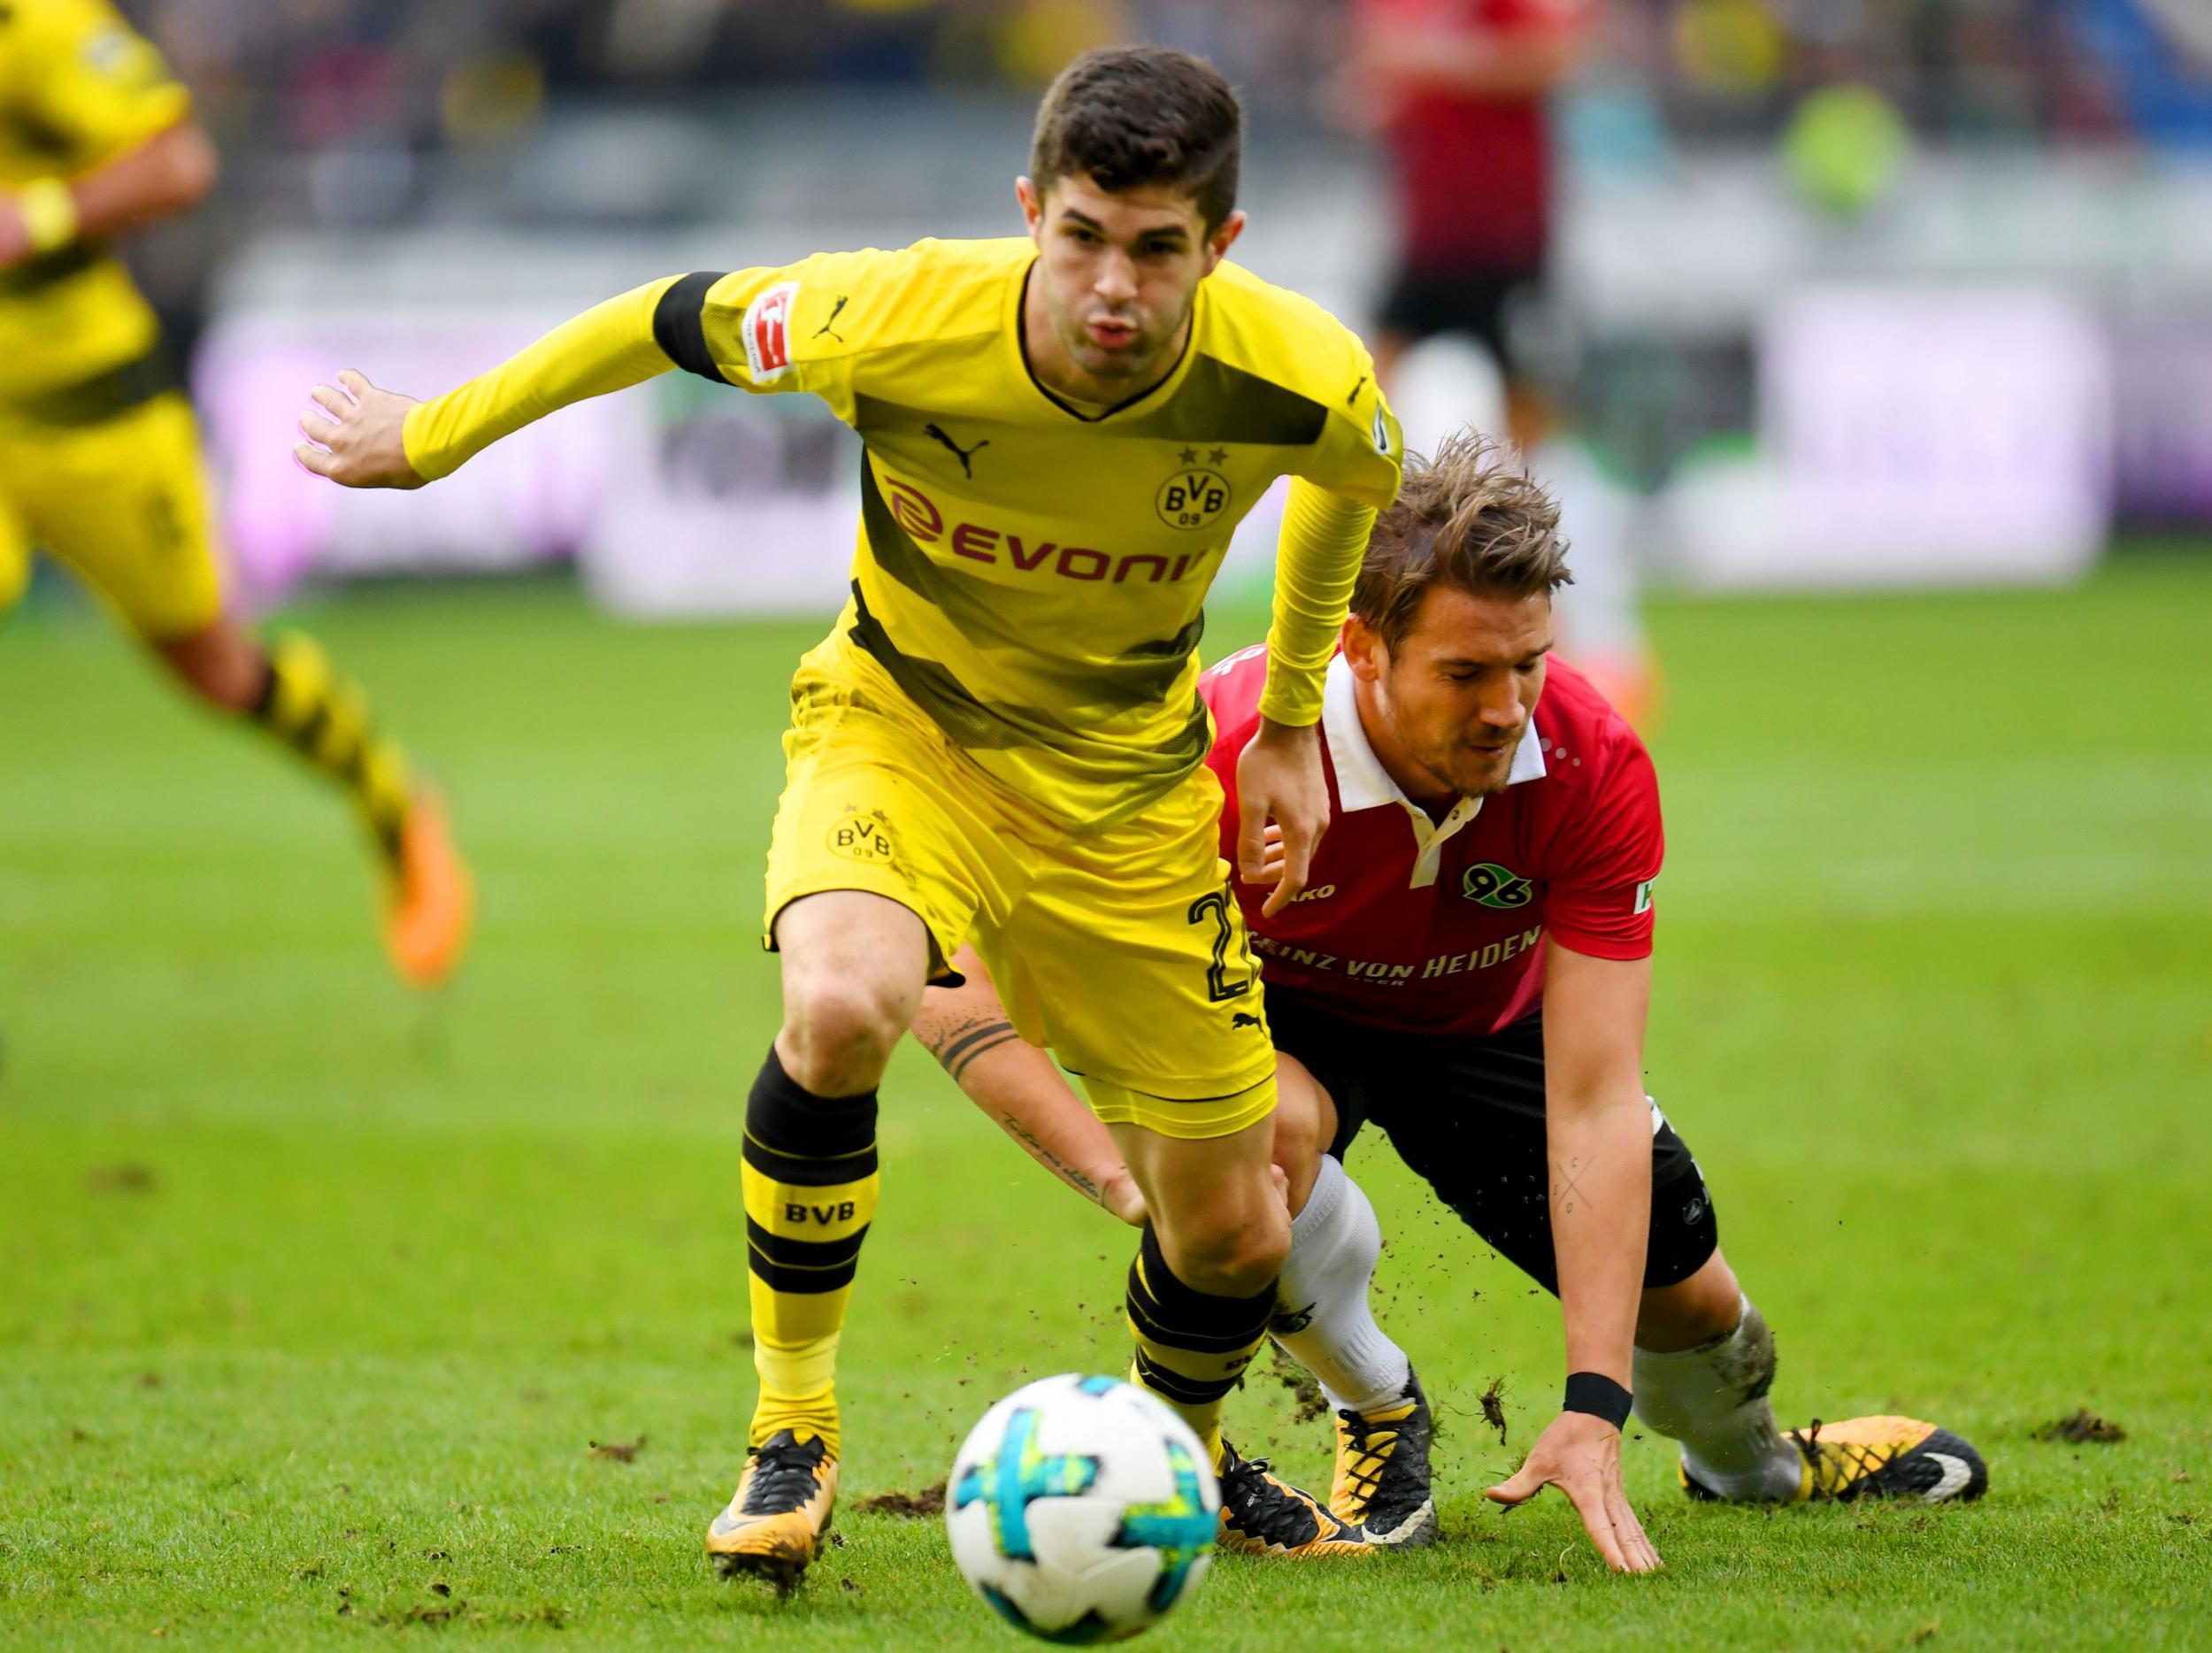 Pulisic is already a star after breaking into Dortmund's team two years ago